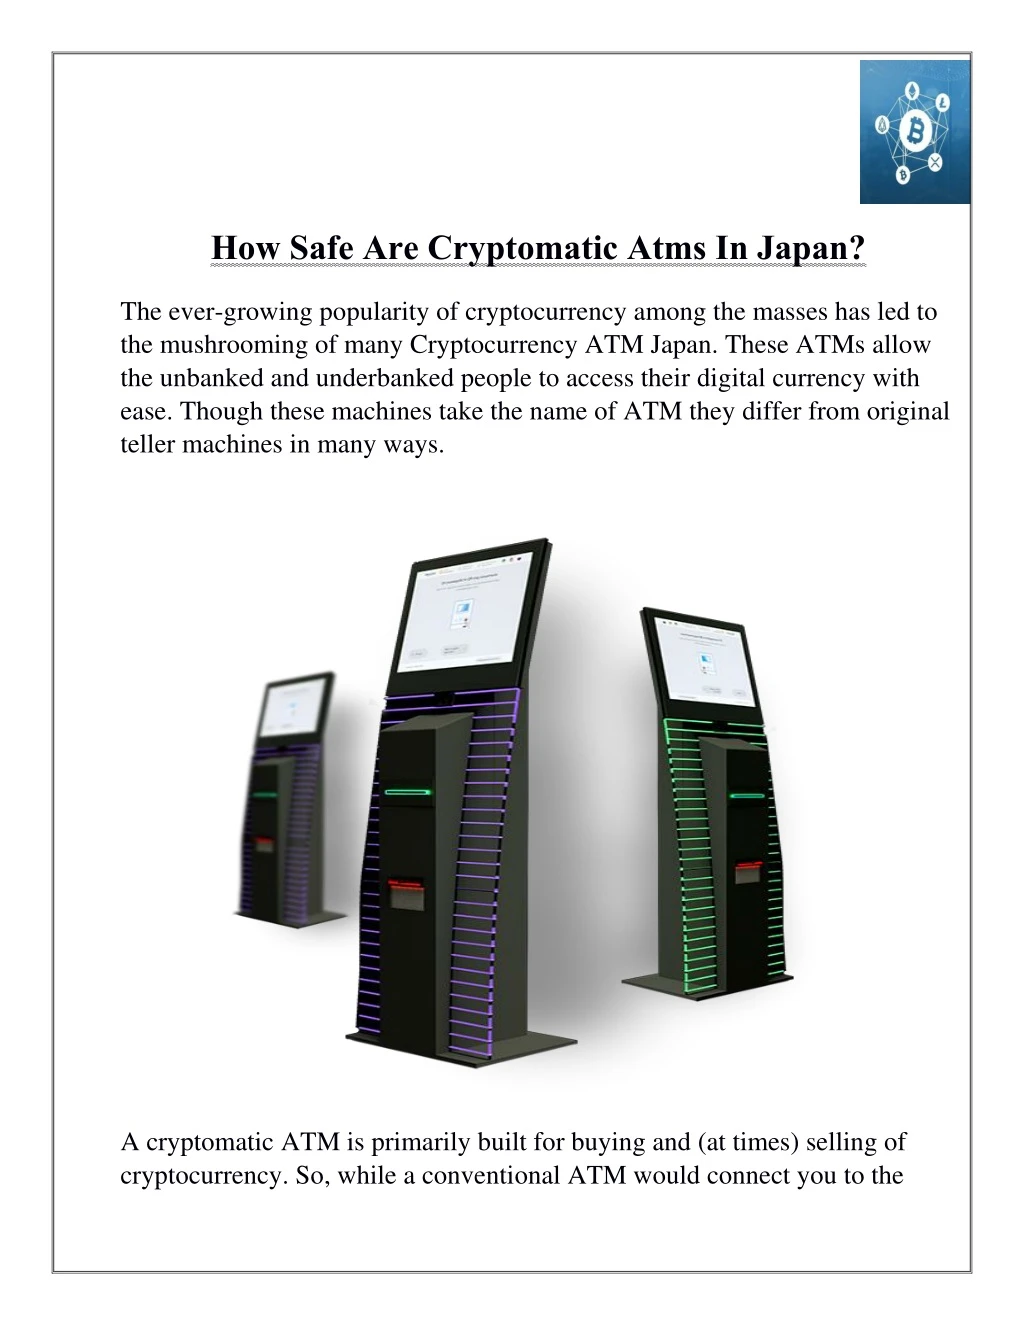 how safe are cryptomatic atms in japan